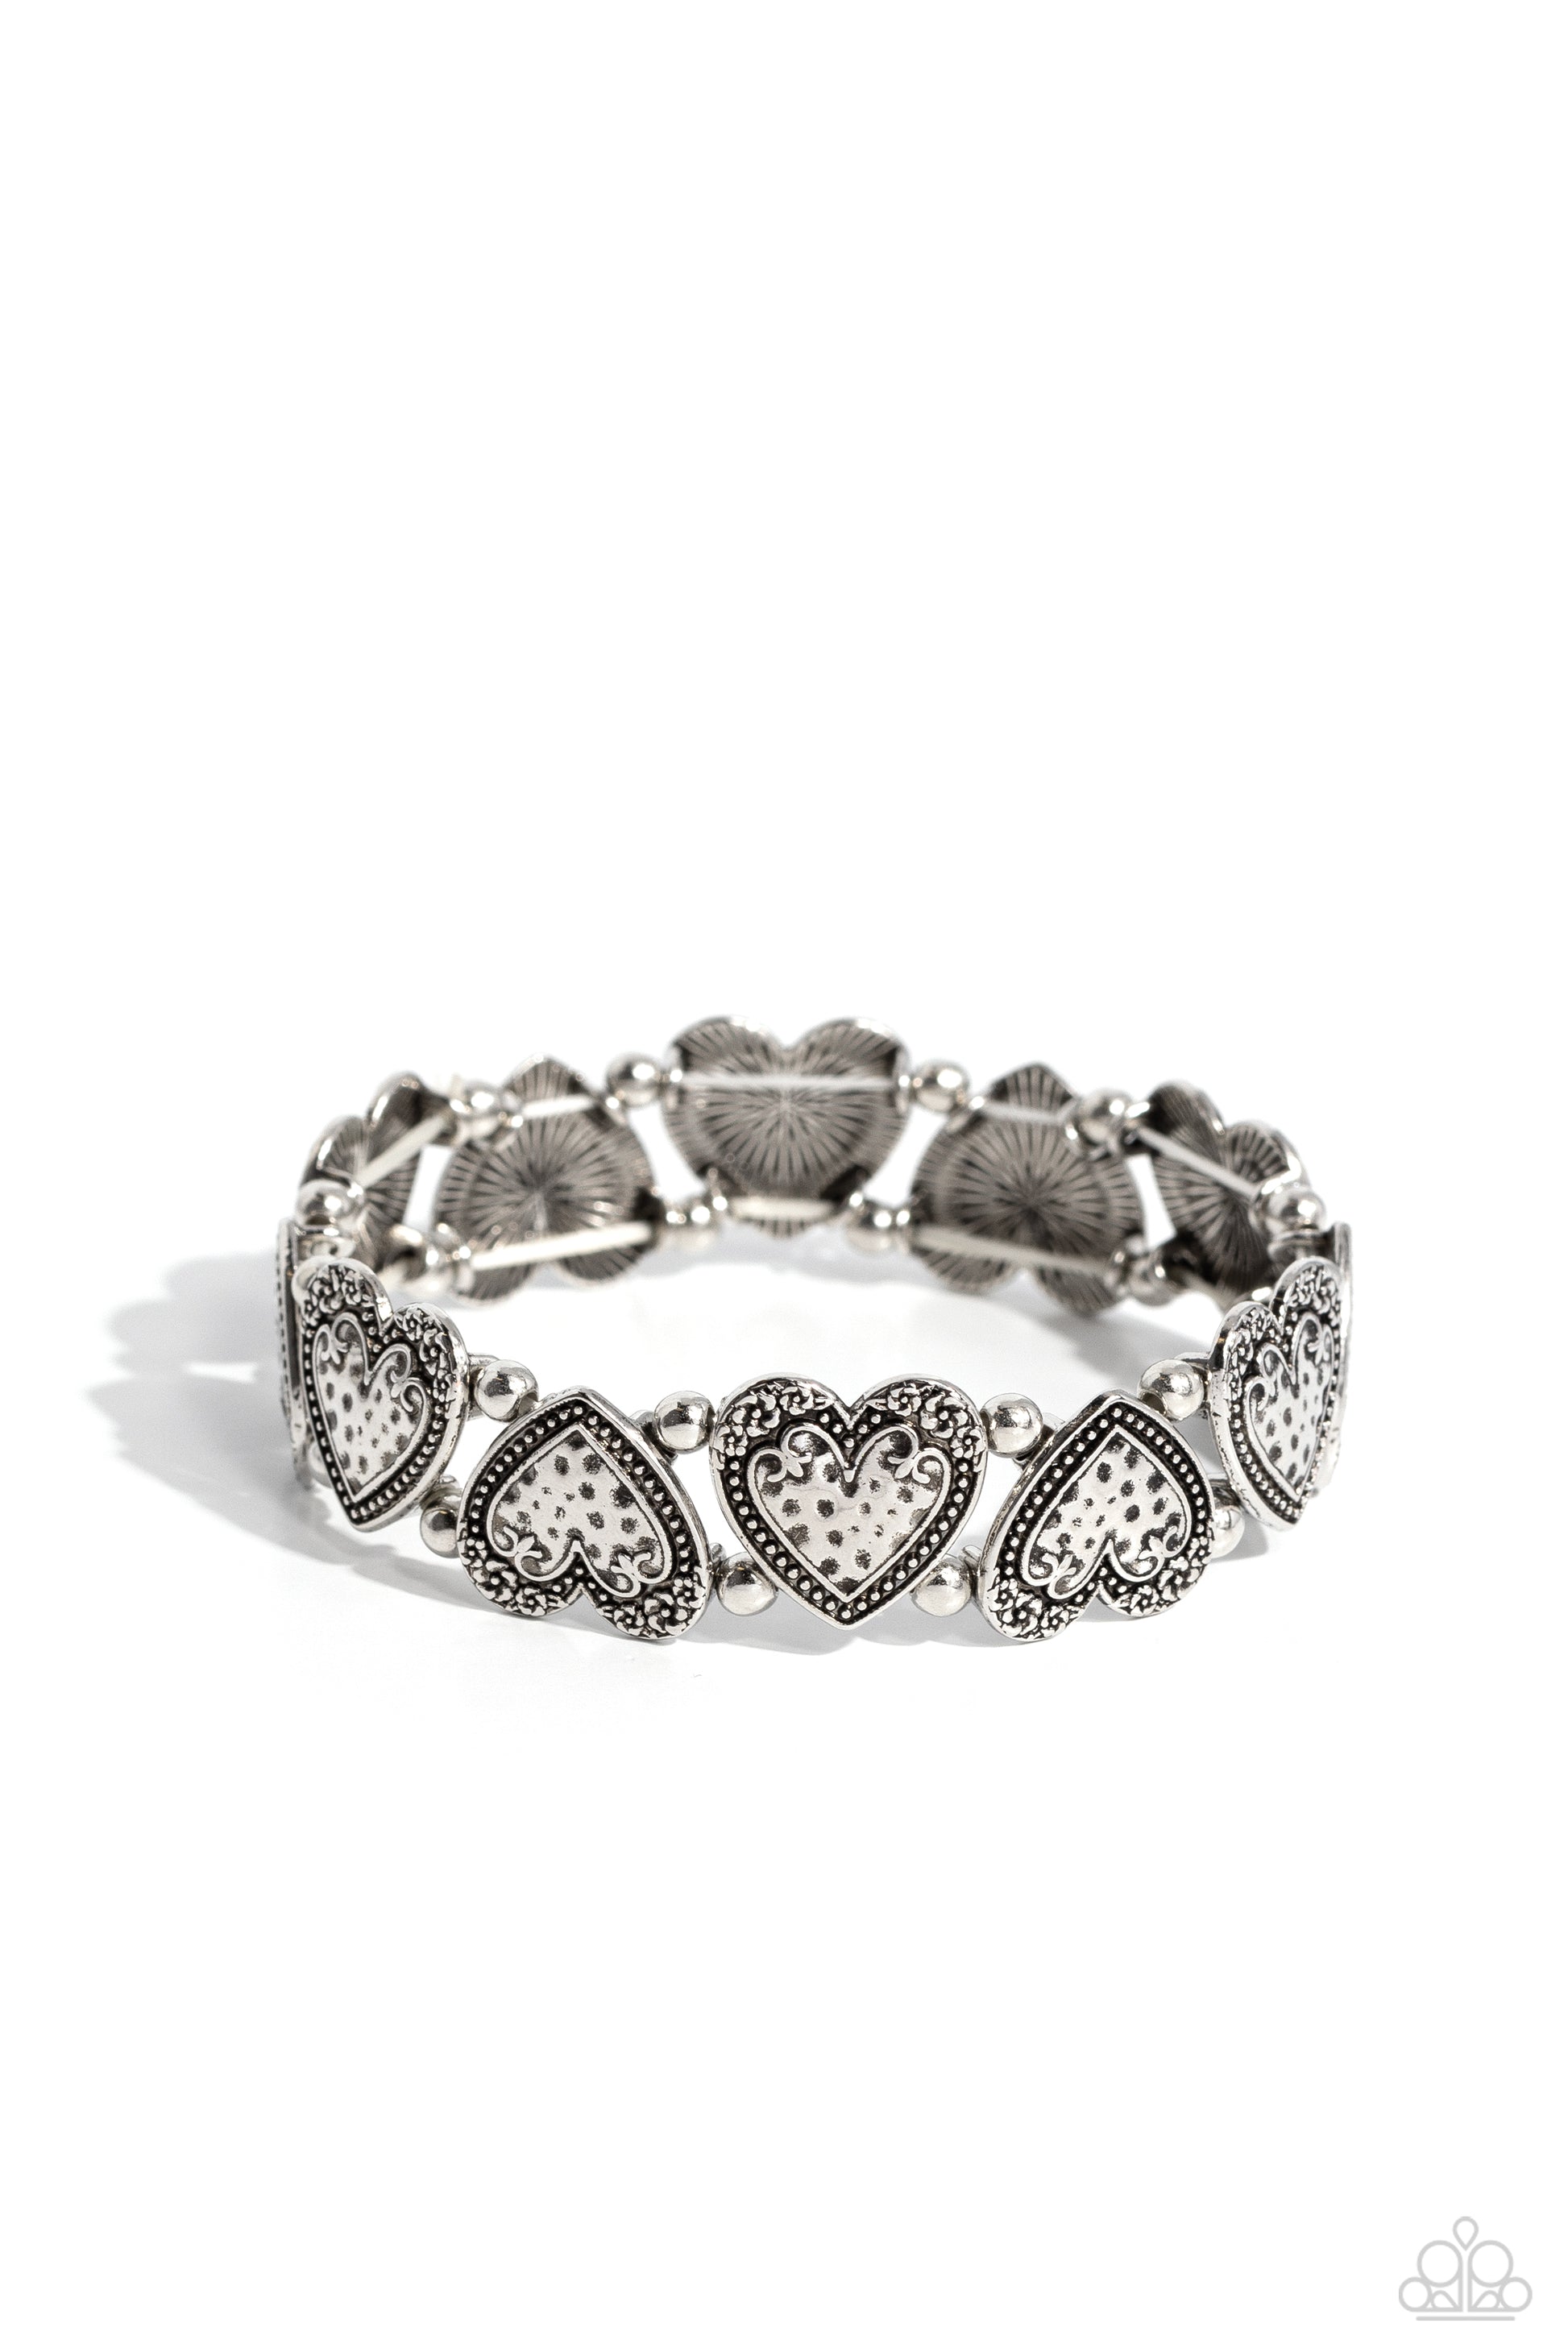 <p>Featuring dainty floral accents, and a hammered, studded surface, a collection of silver hearts, separated by stacked silver beads, alternate in direction around the wrist on elastic stretchy bands to create a dynamic statement.</p> <p><i> Sold as one individual bracelet.</i></p>